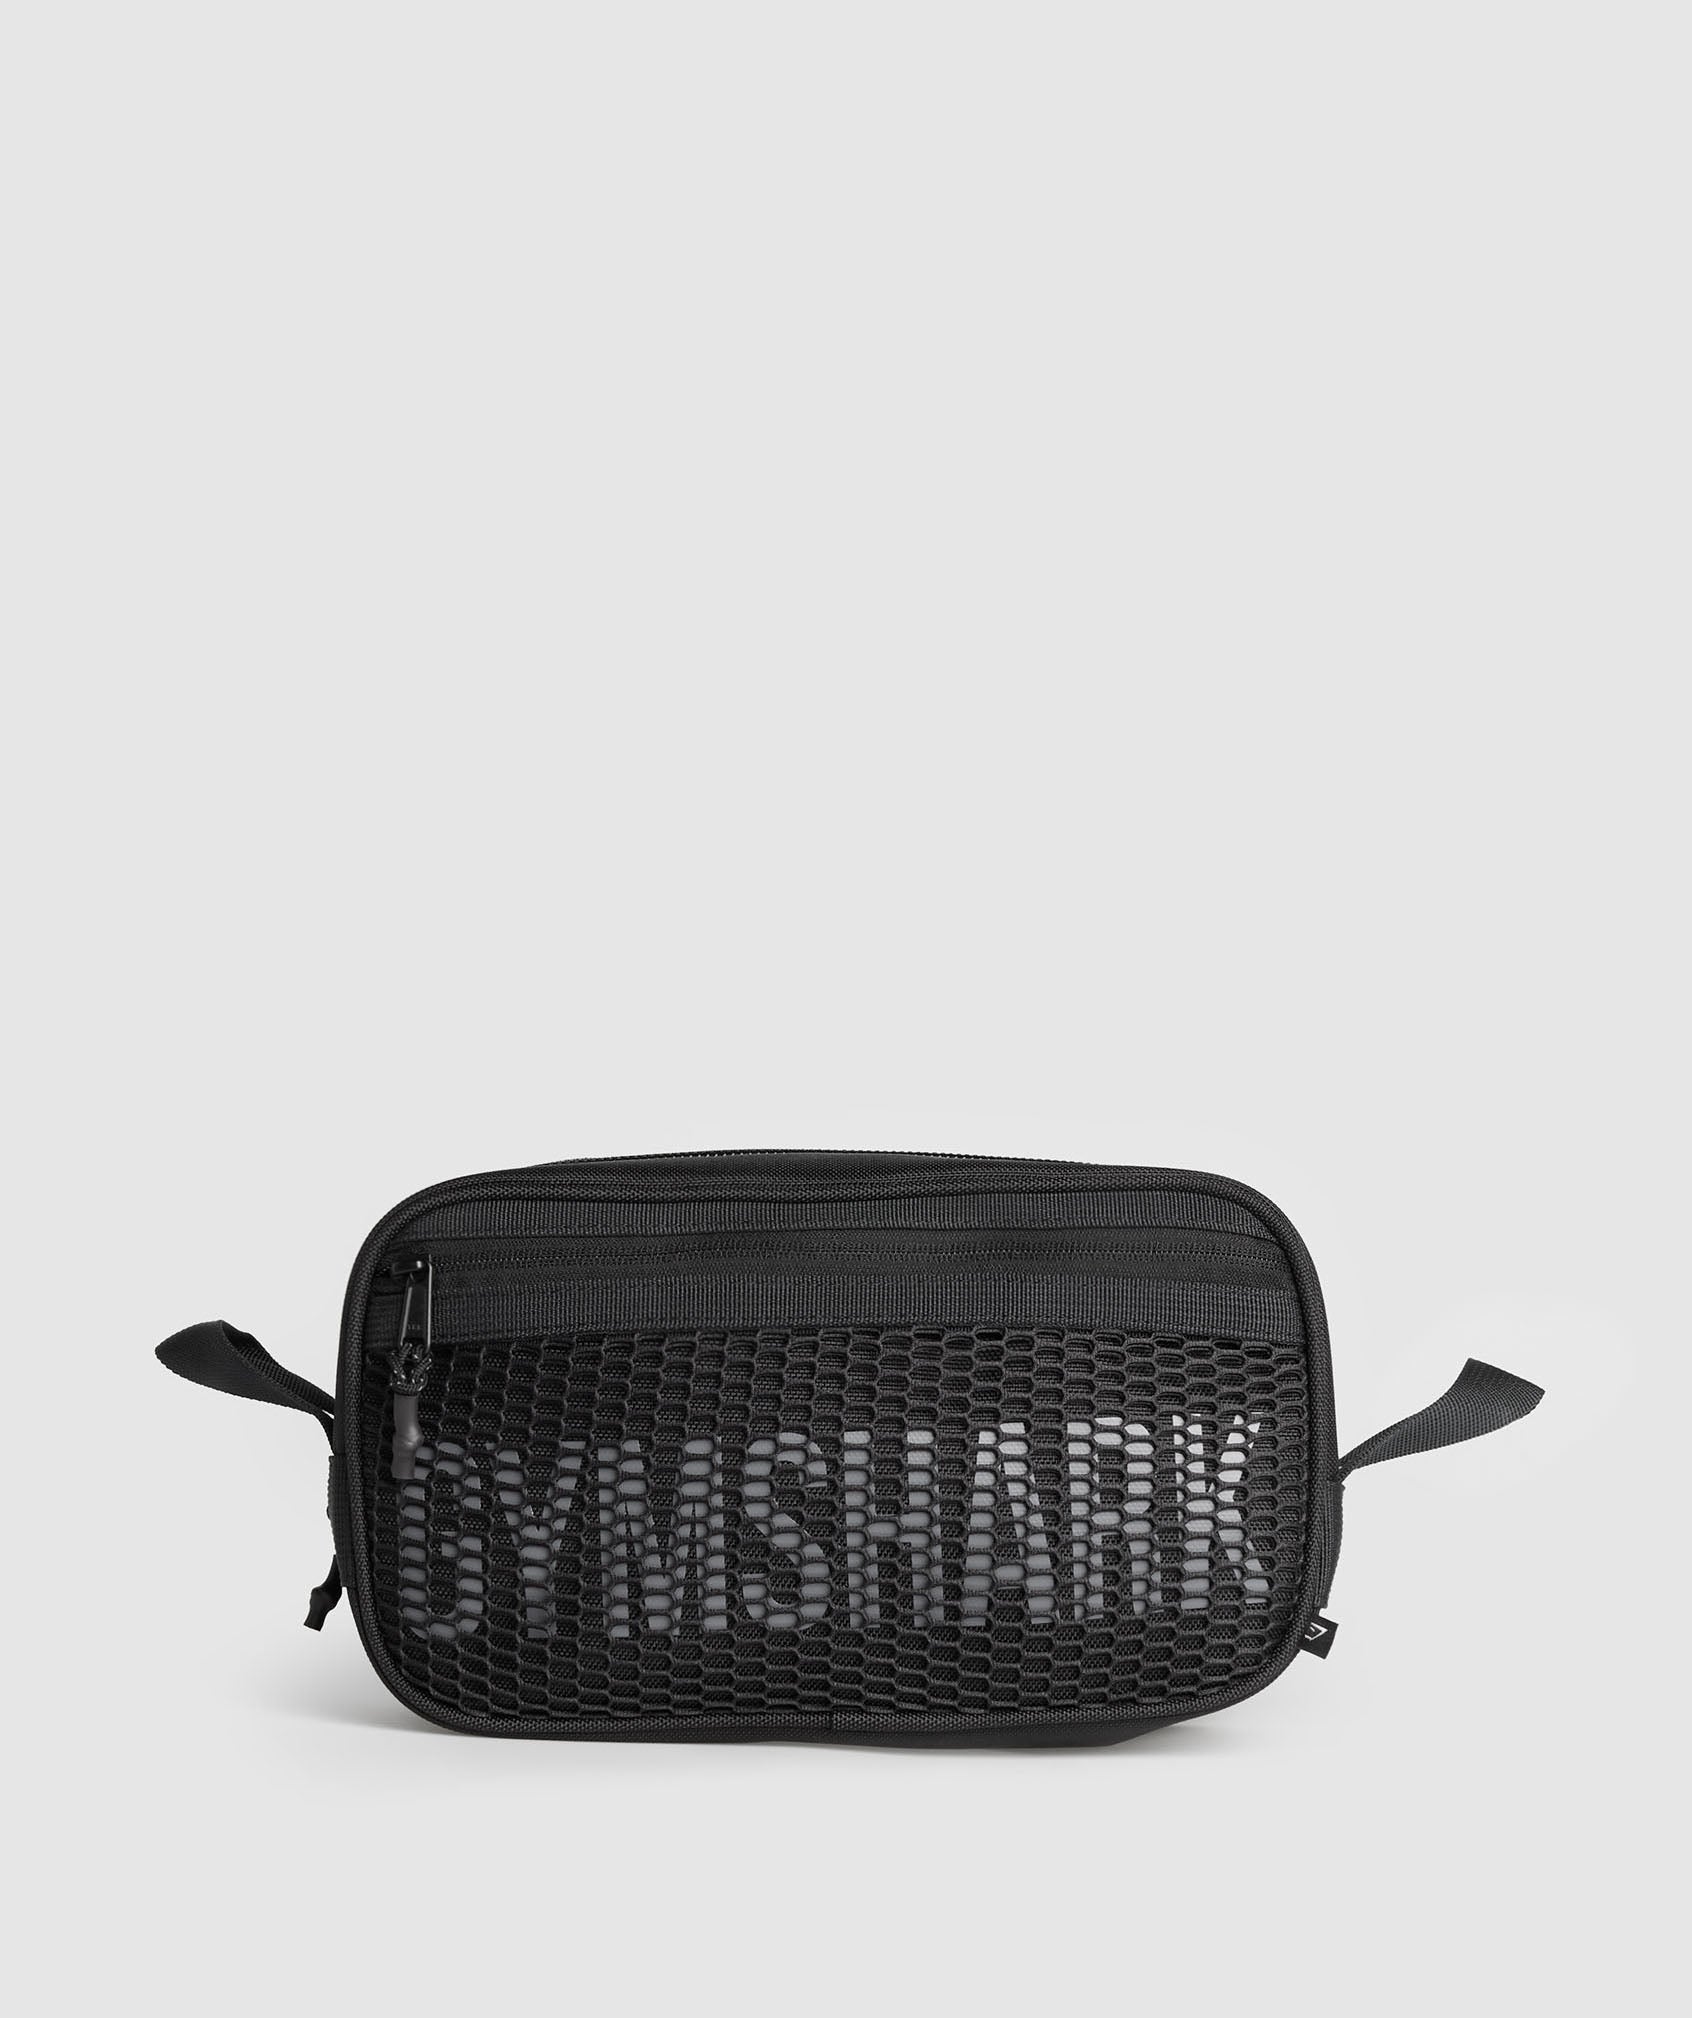 Pursuit Toiletry Bag in Black - view 1